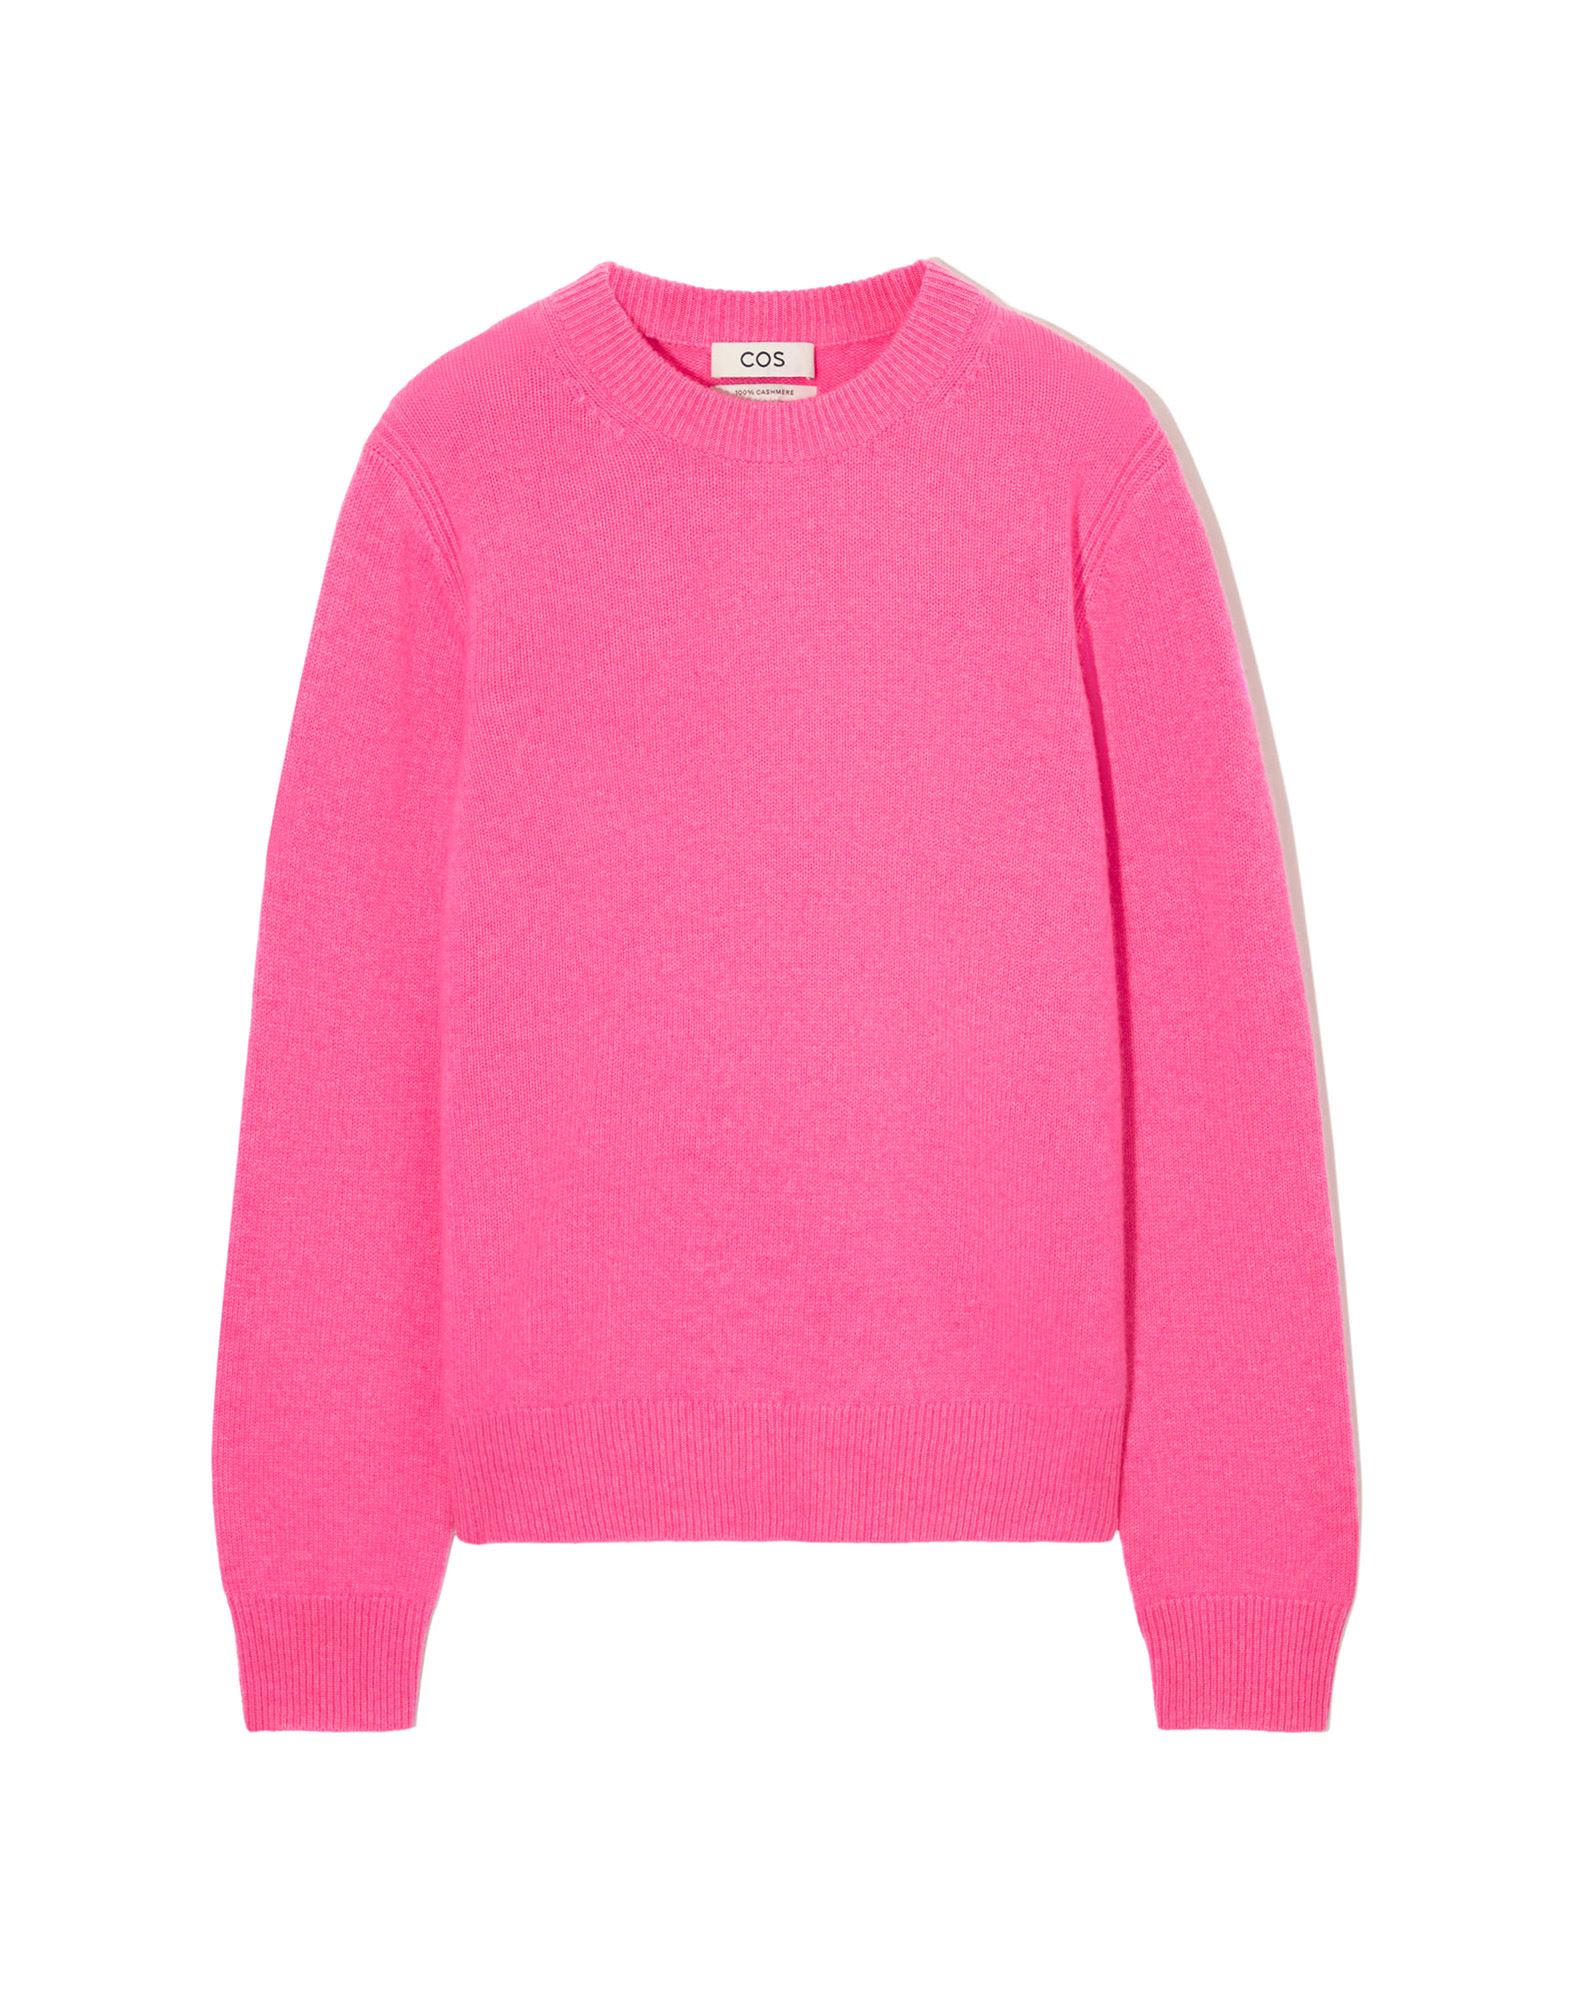 COS COS WOMAN SWEATER PINK SIZE M CASHMERE